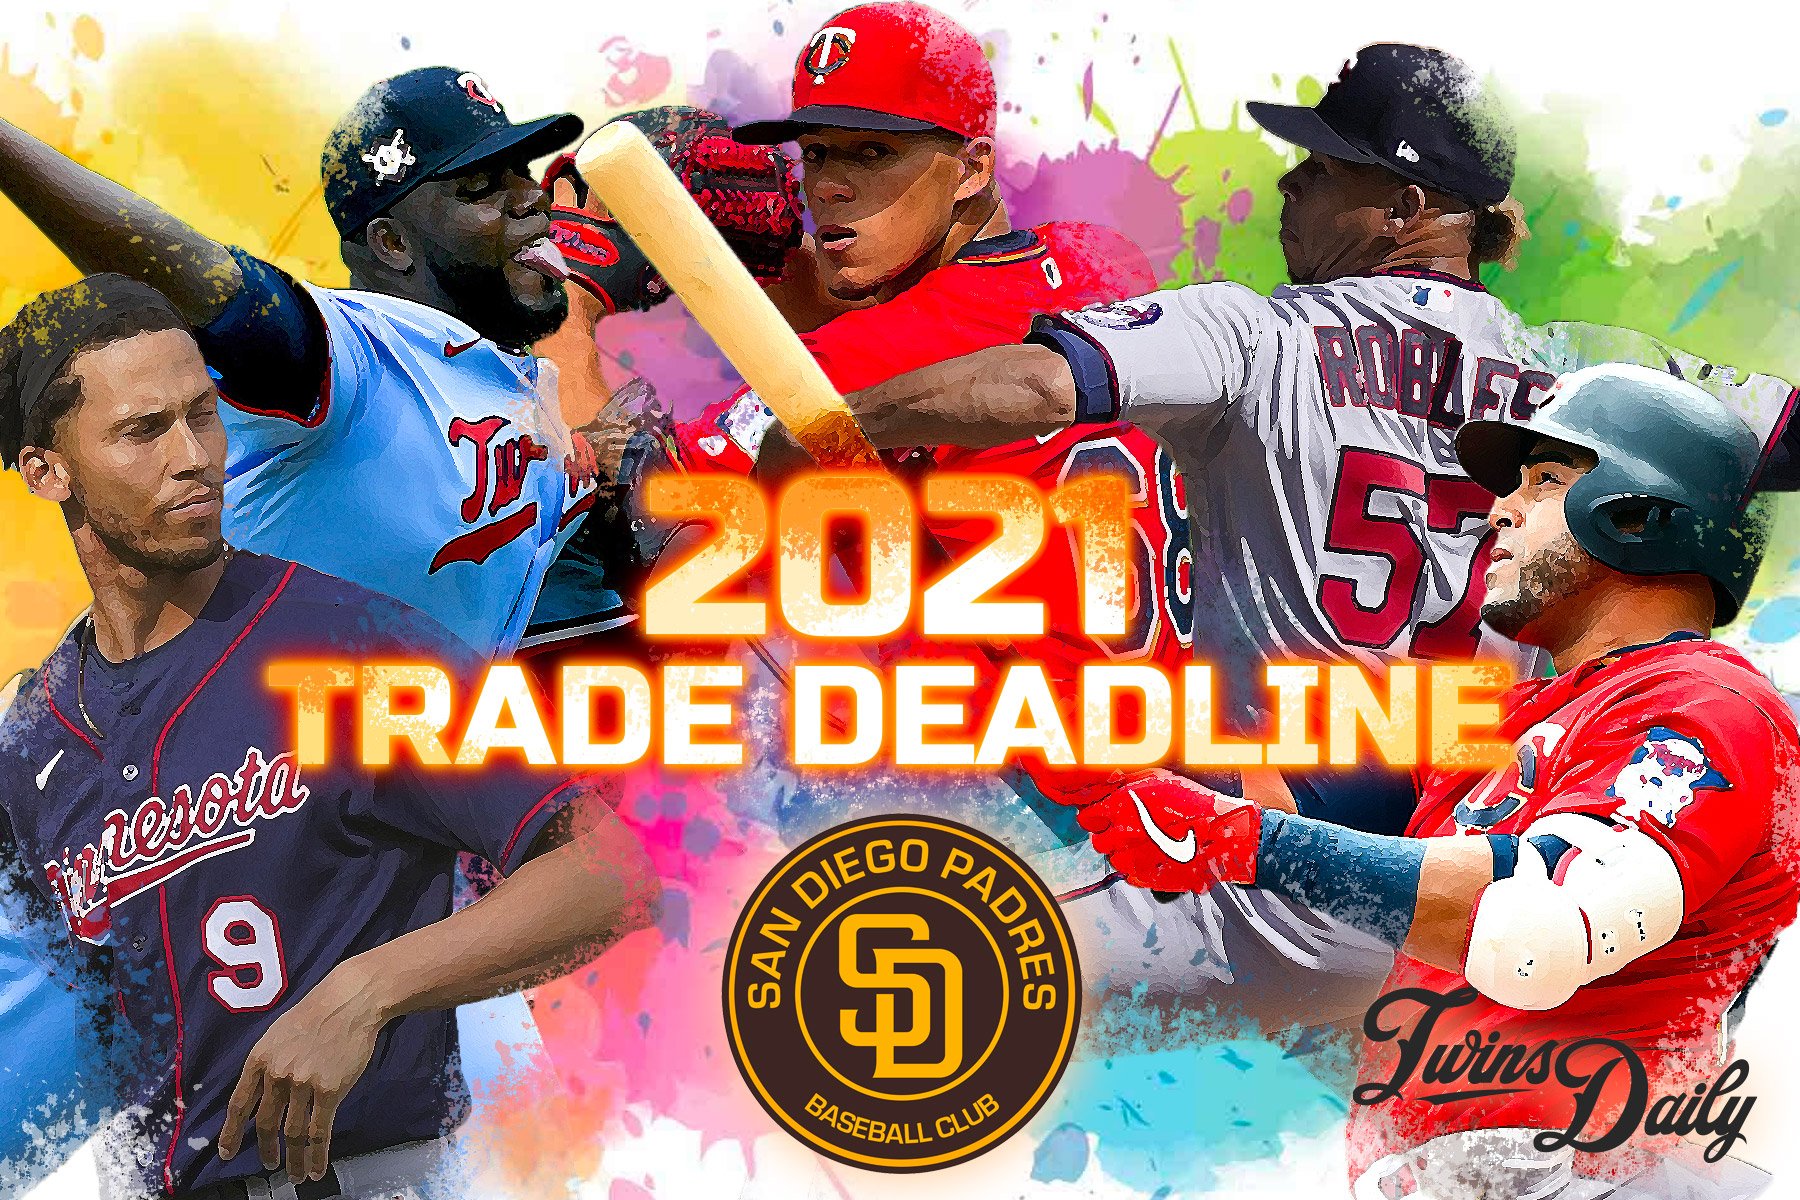 Padres choose small moves over blockbusters at trade deadline